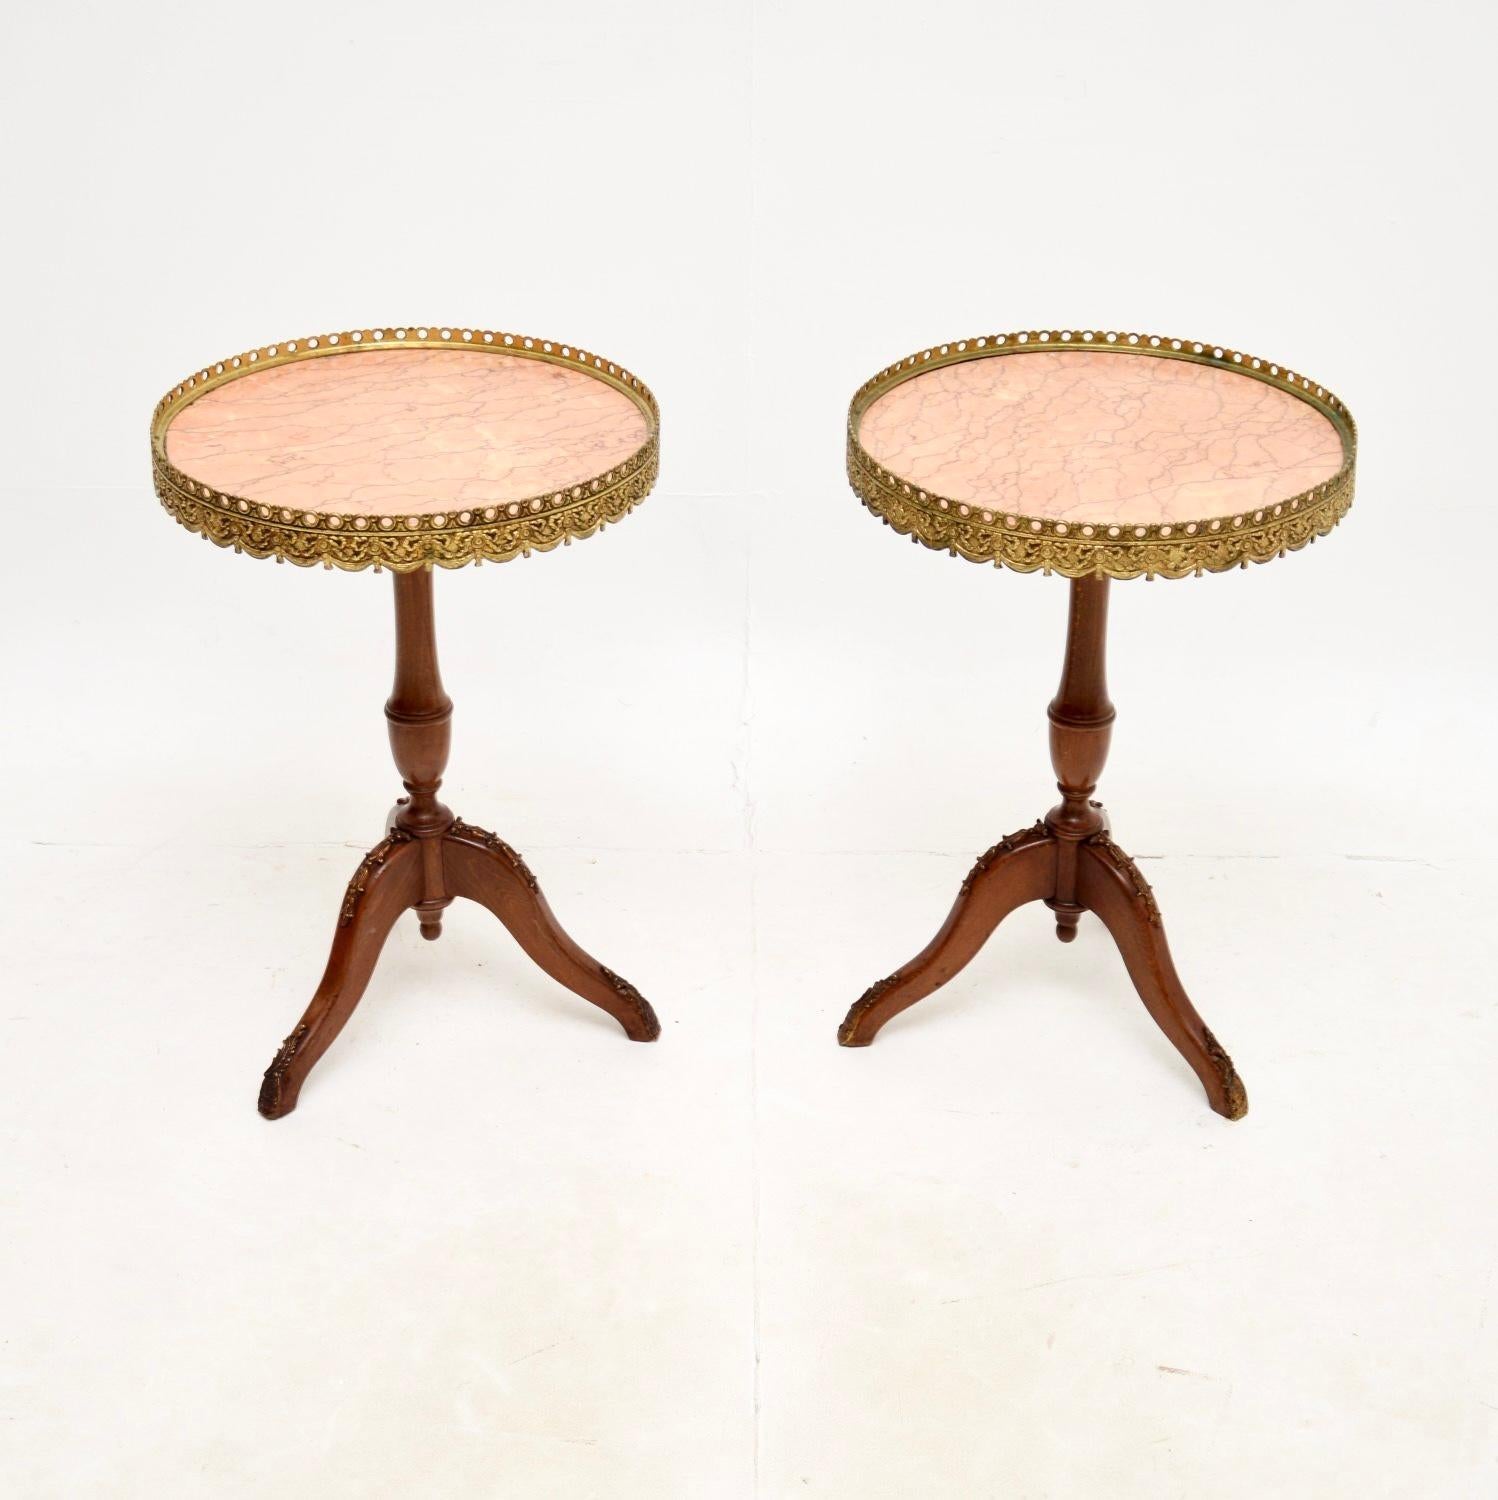 A stunning and very well made pair of antique marble top wine tables in the French style, dating from around the 1930’s.

The quality is exceptional, and they are a very useful size. The frames are solid birch, with beautiful gilt metal mounts, the